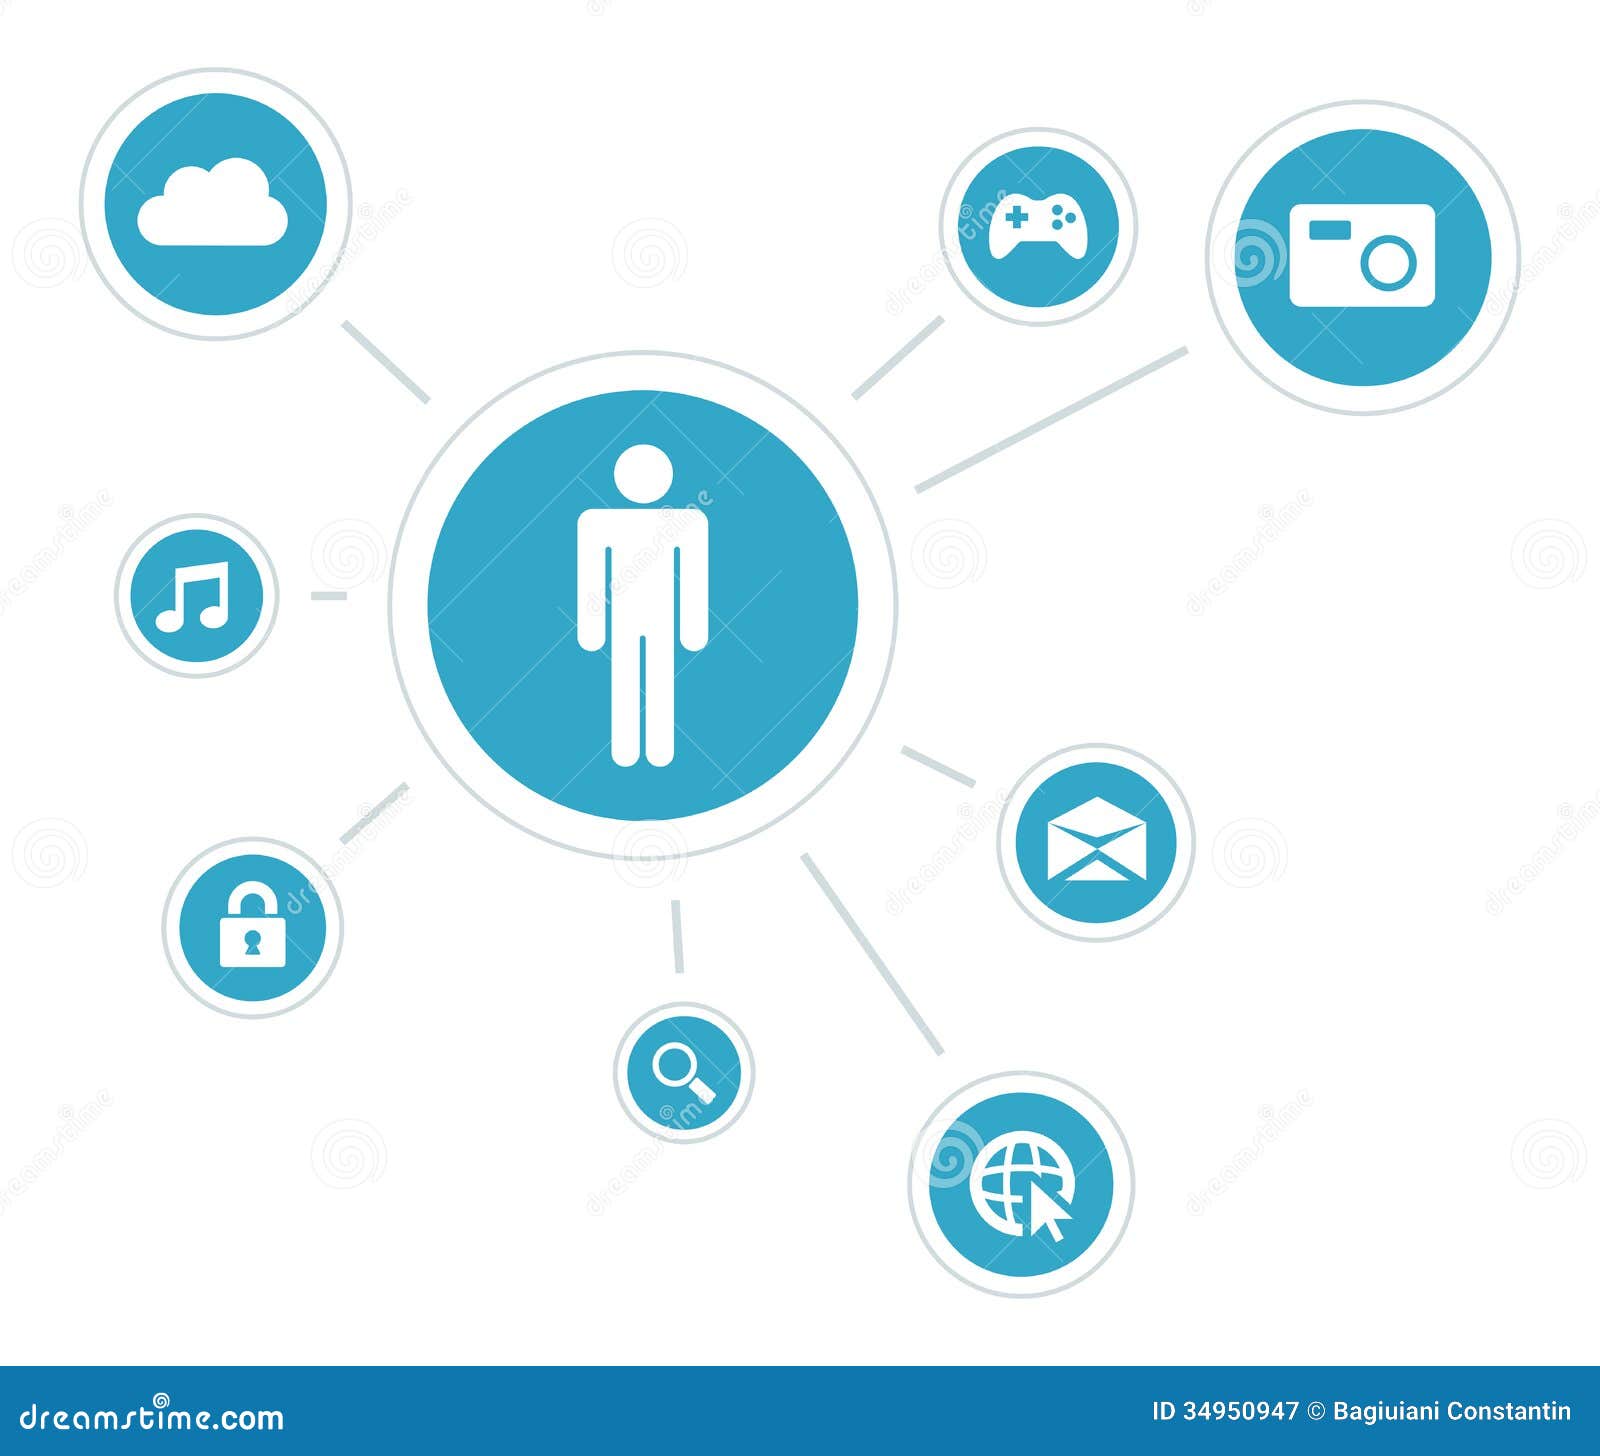 This image is a vector file representing a User Center Design App ...